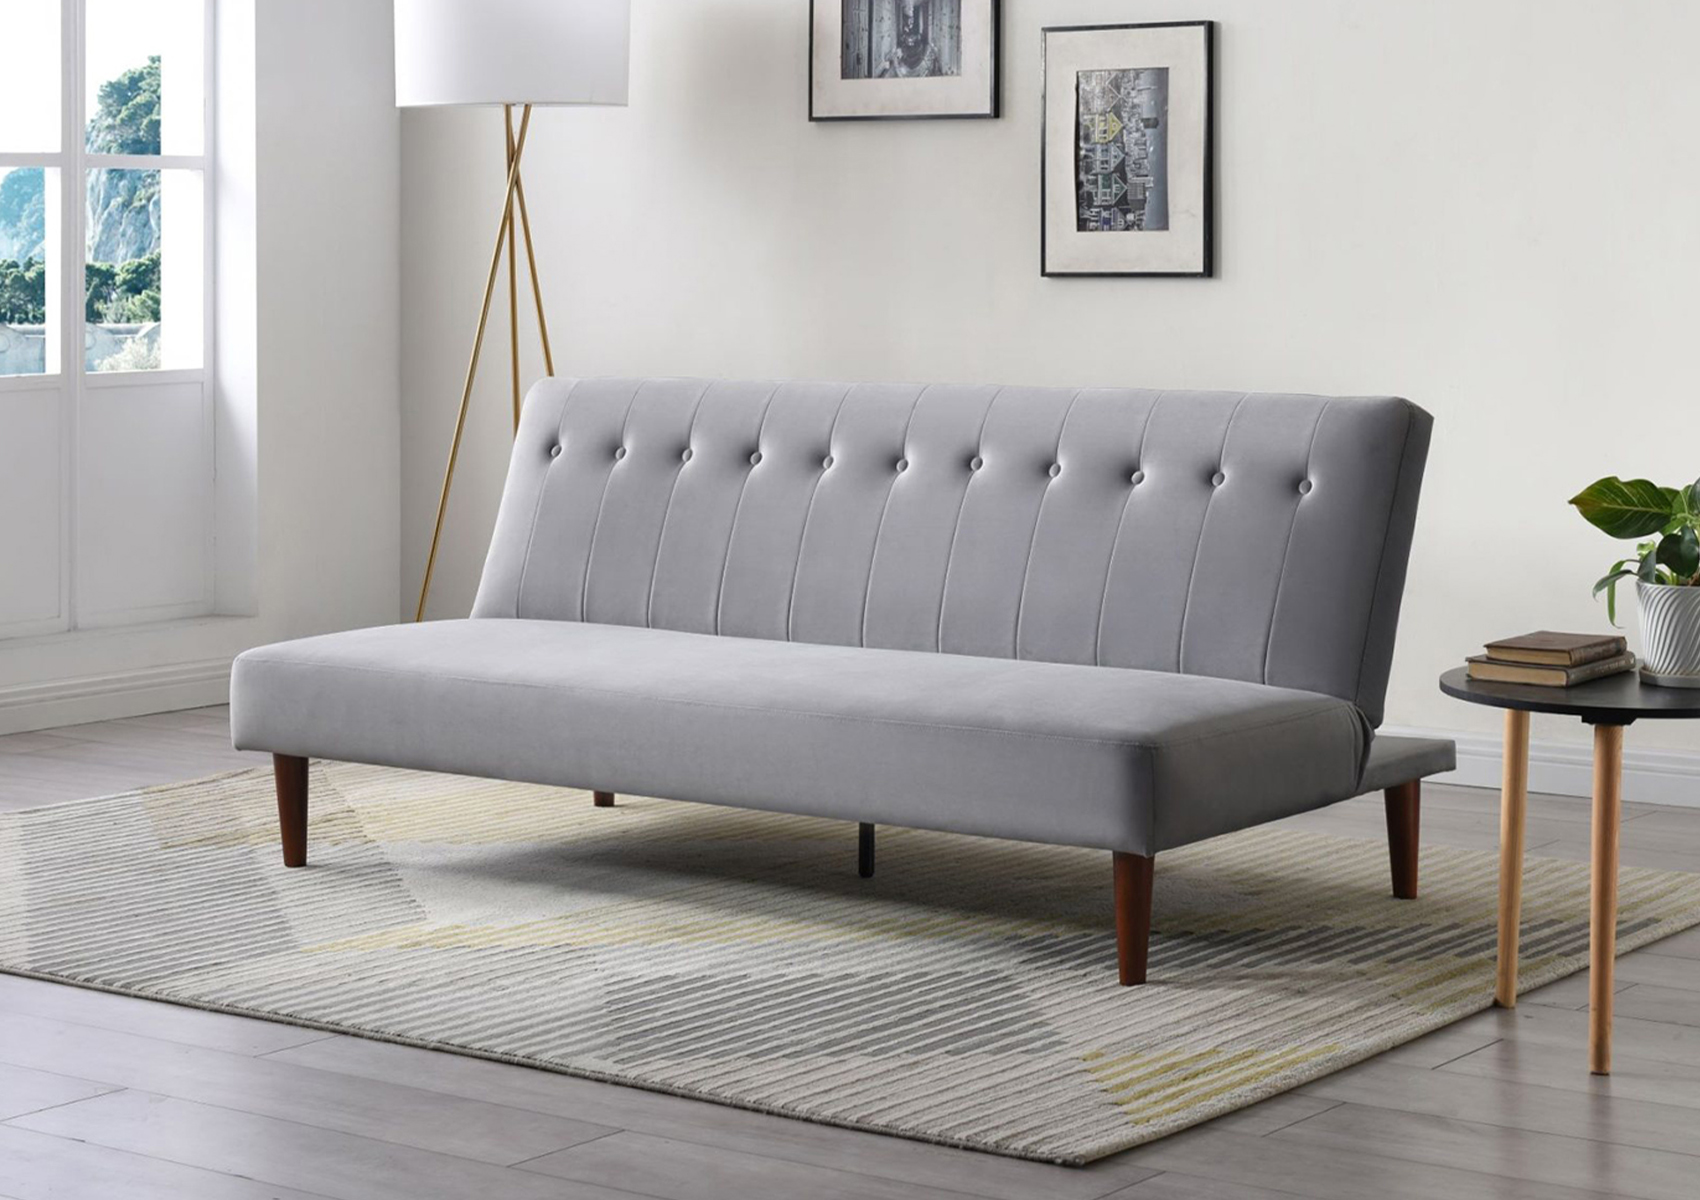 View Cotswold Grey Sofa Bed Time4Sleep information